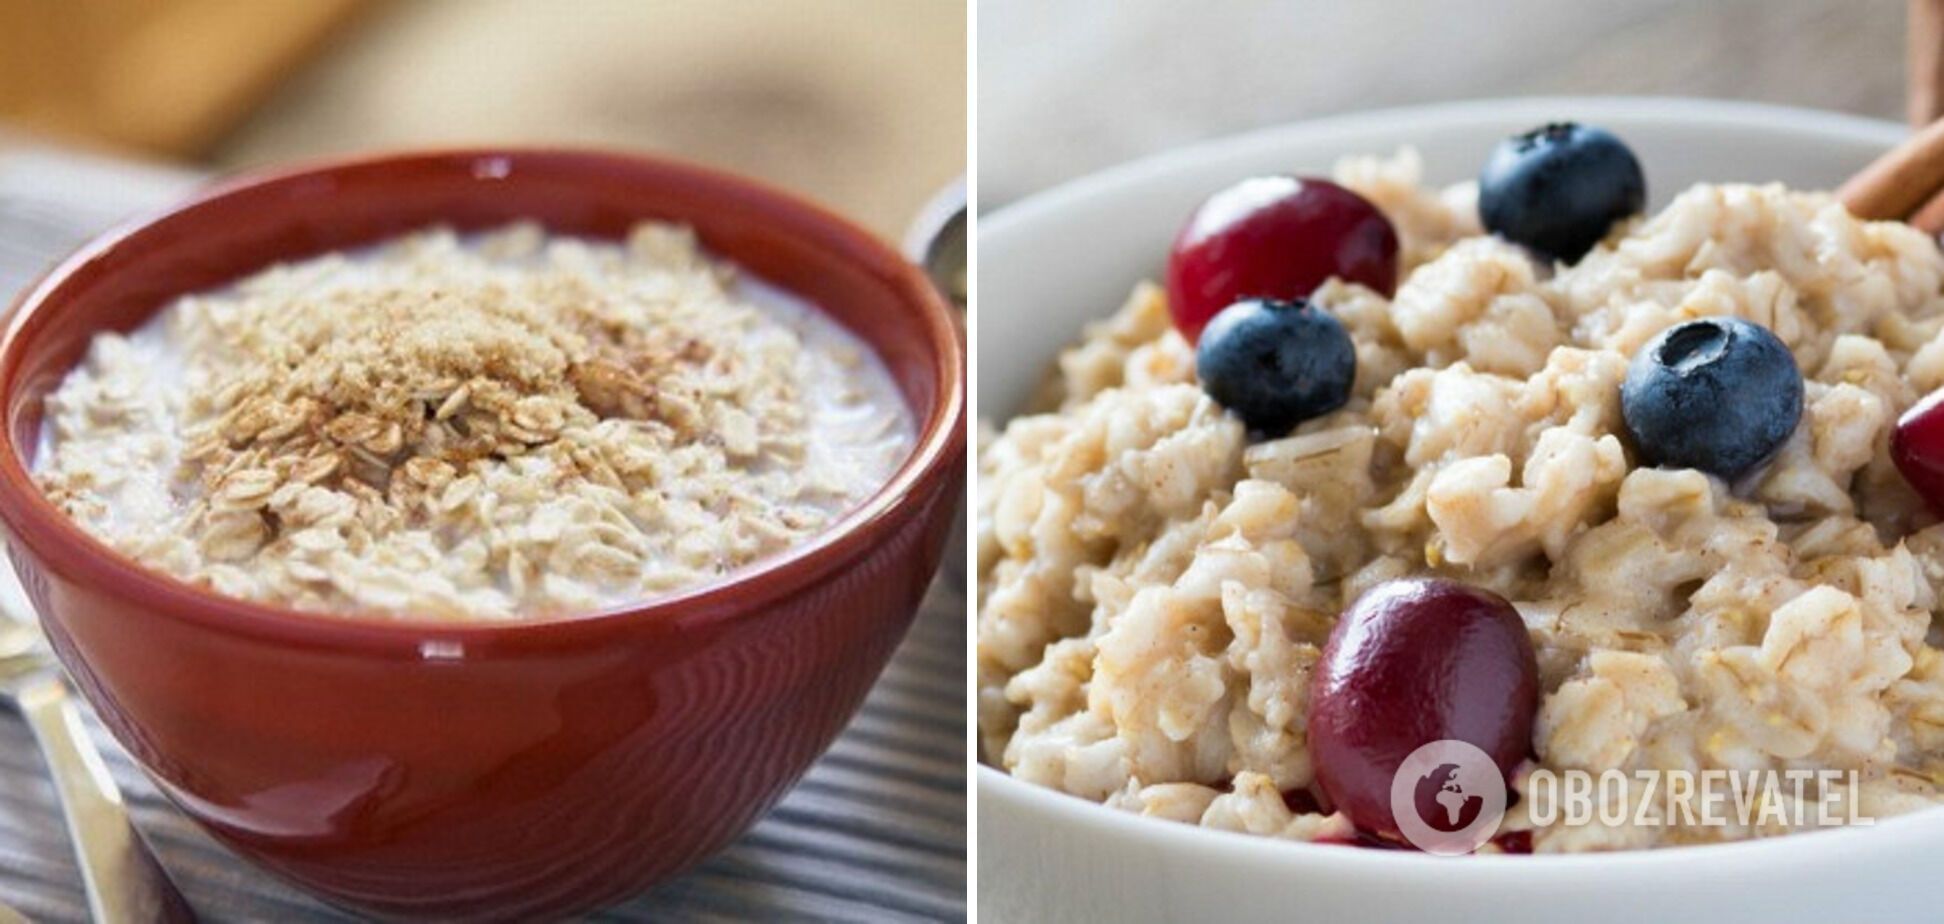 How to cook delicious oatmeal